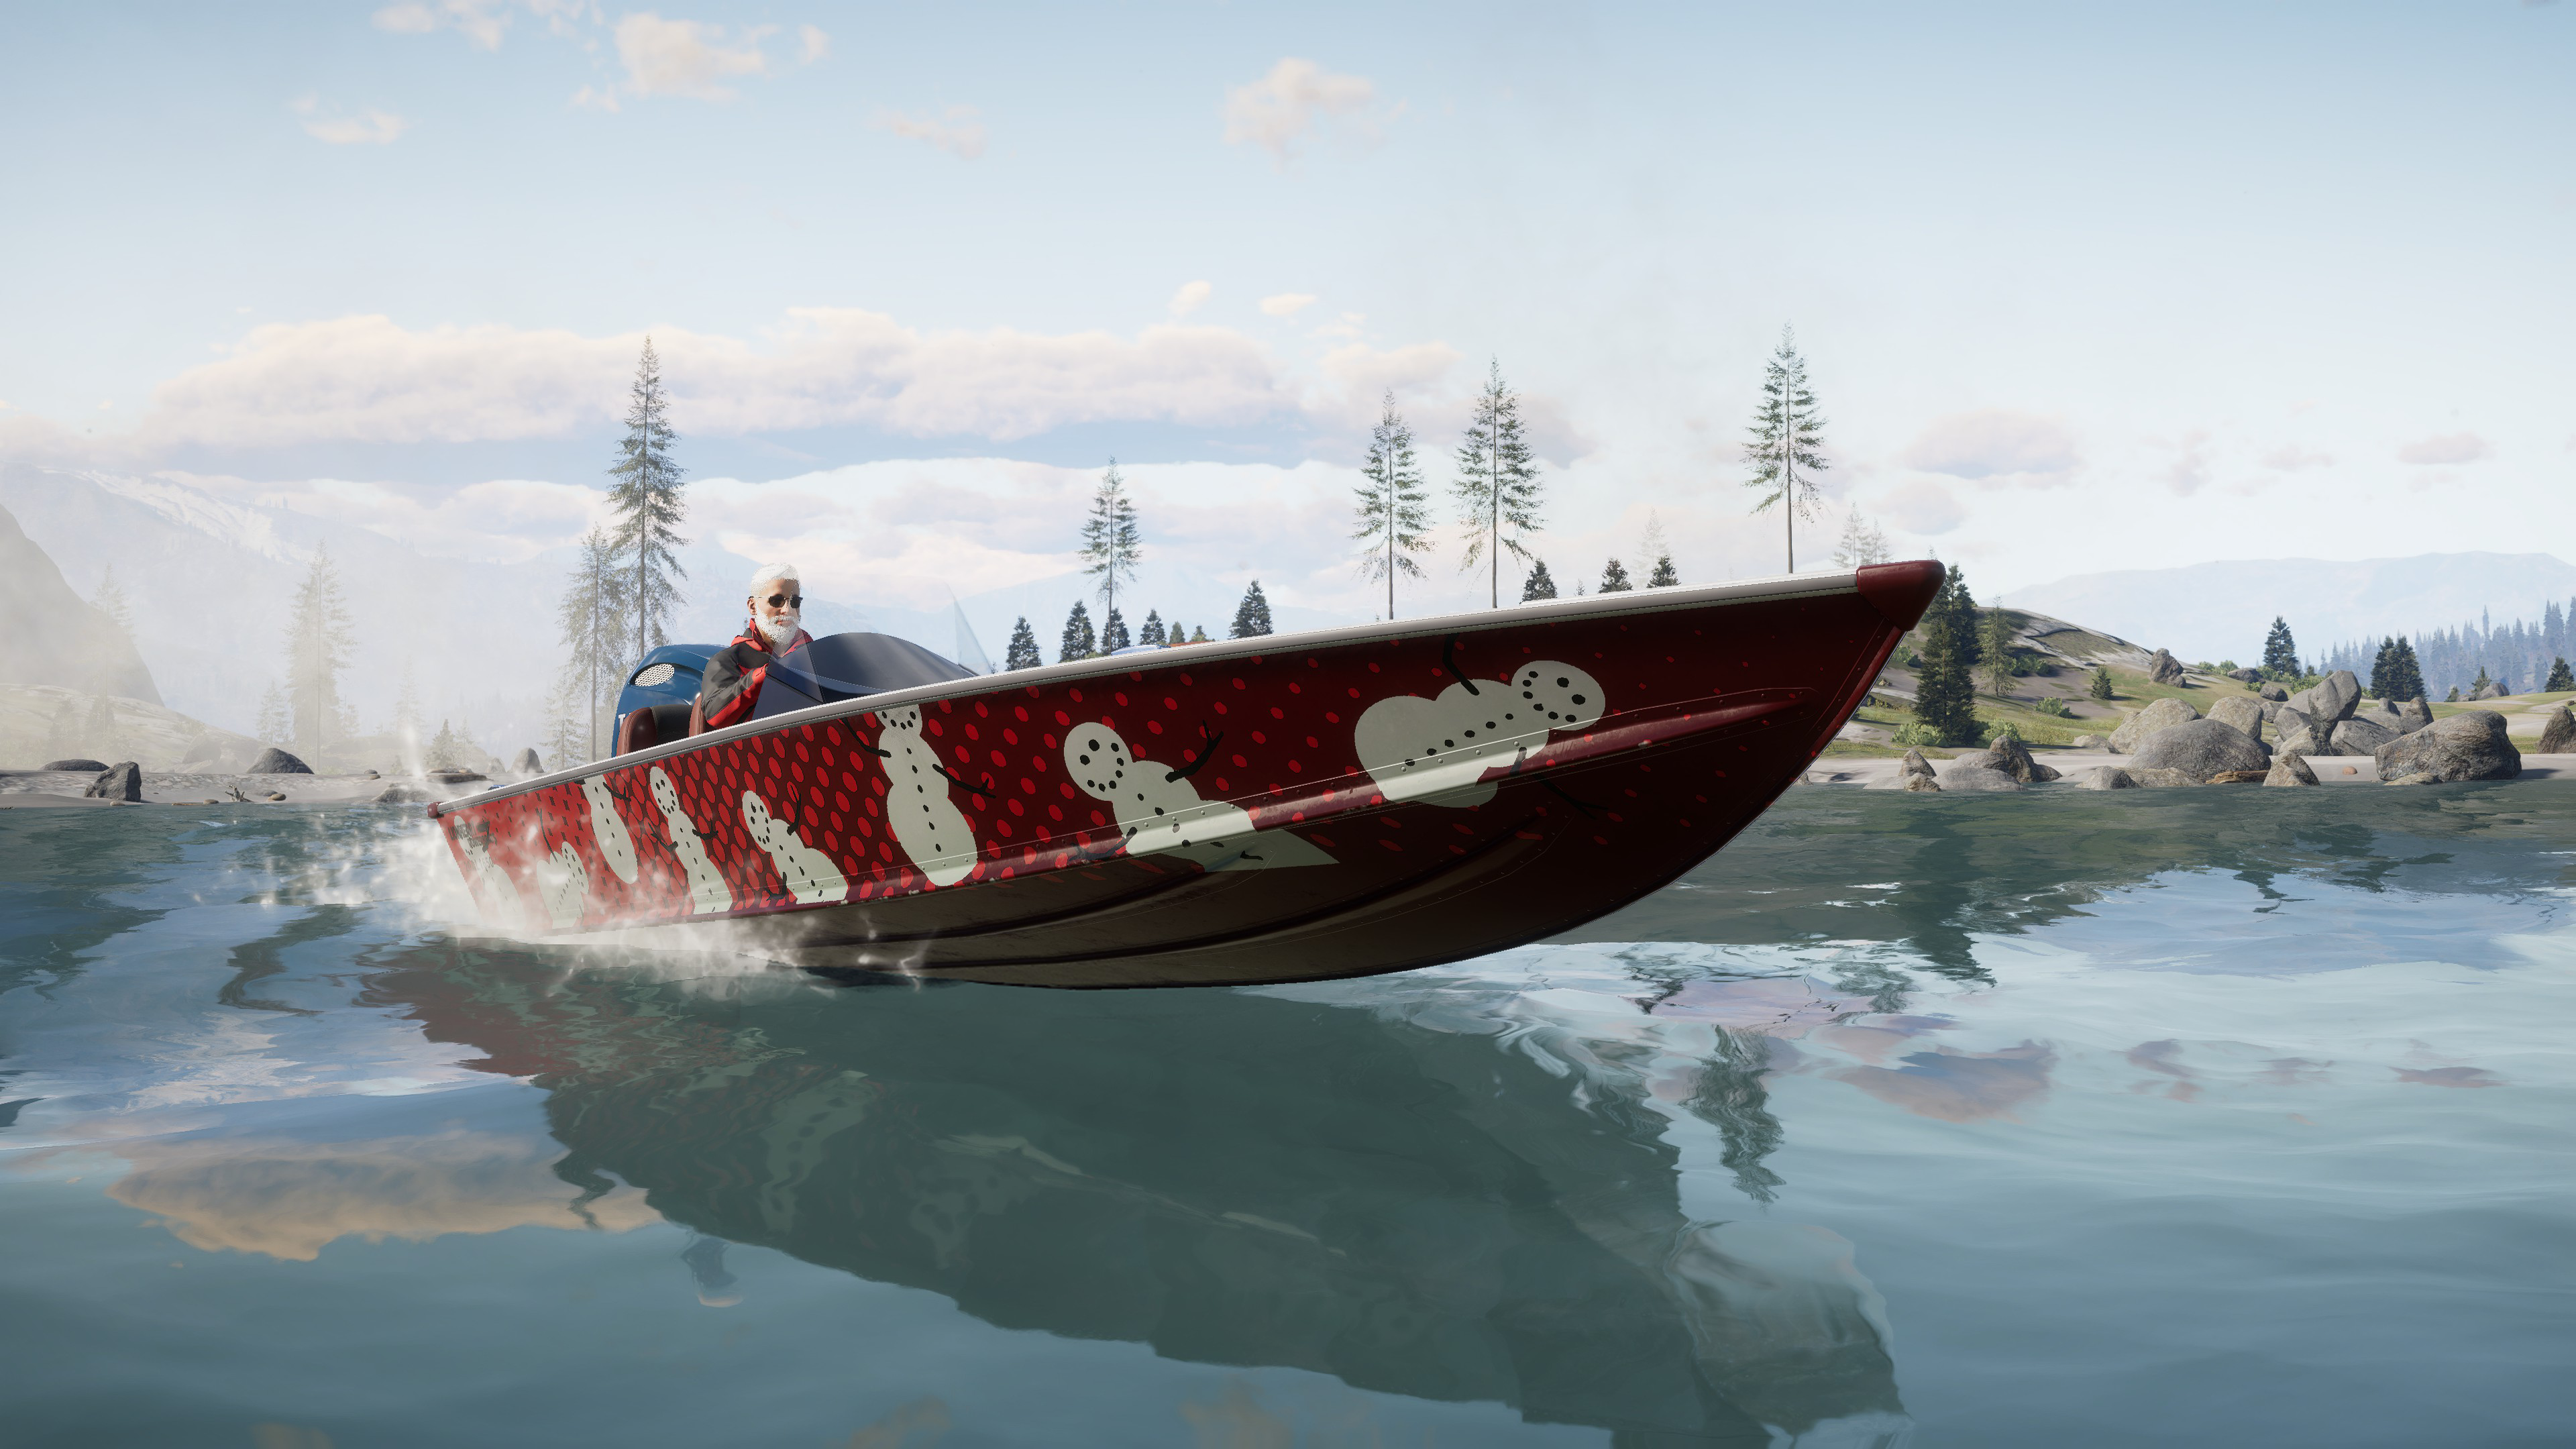 One of the boat liveries available in the free Winter Vehicle Cosmetics Pack.